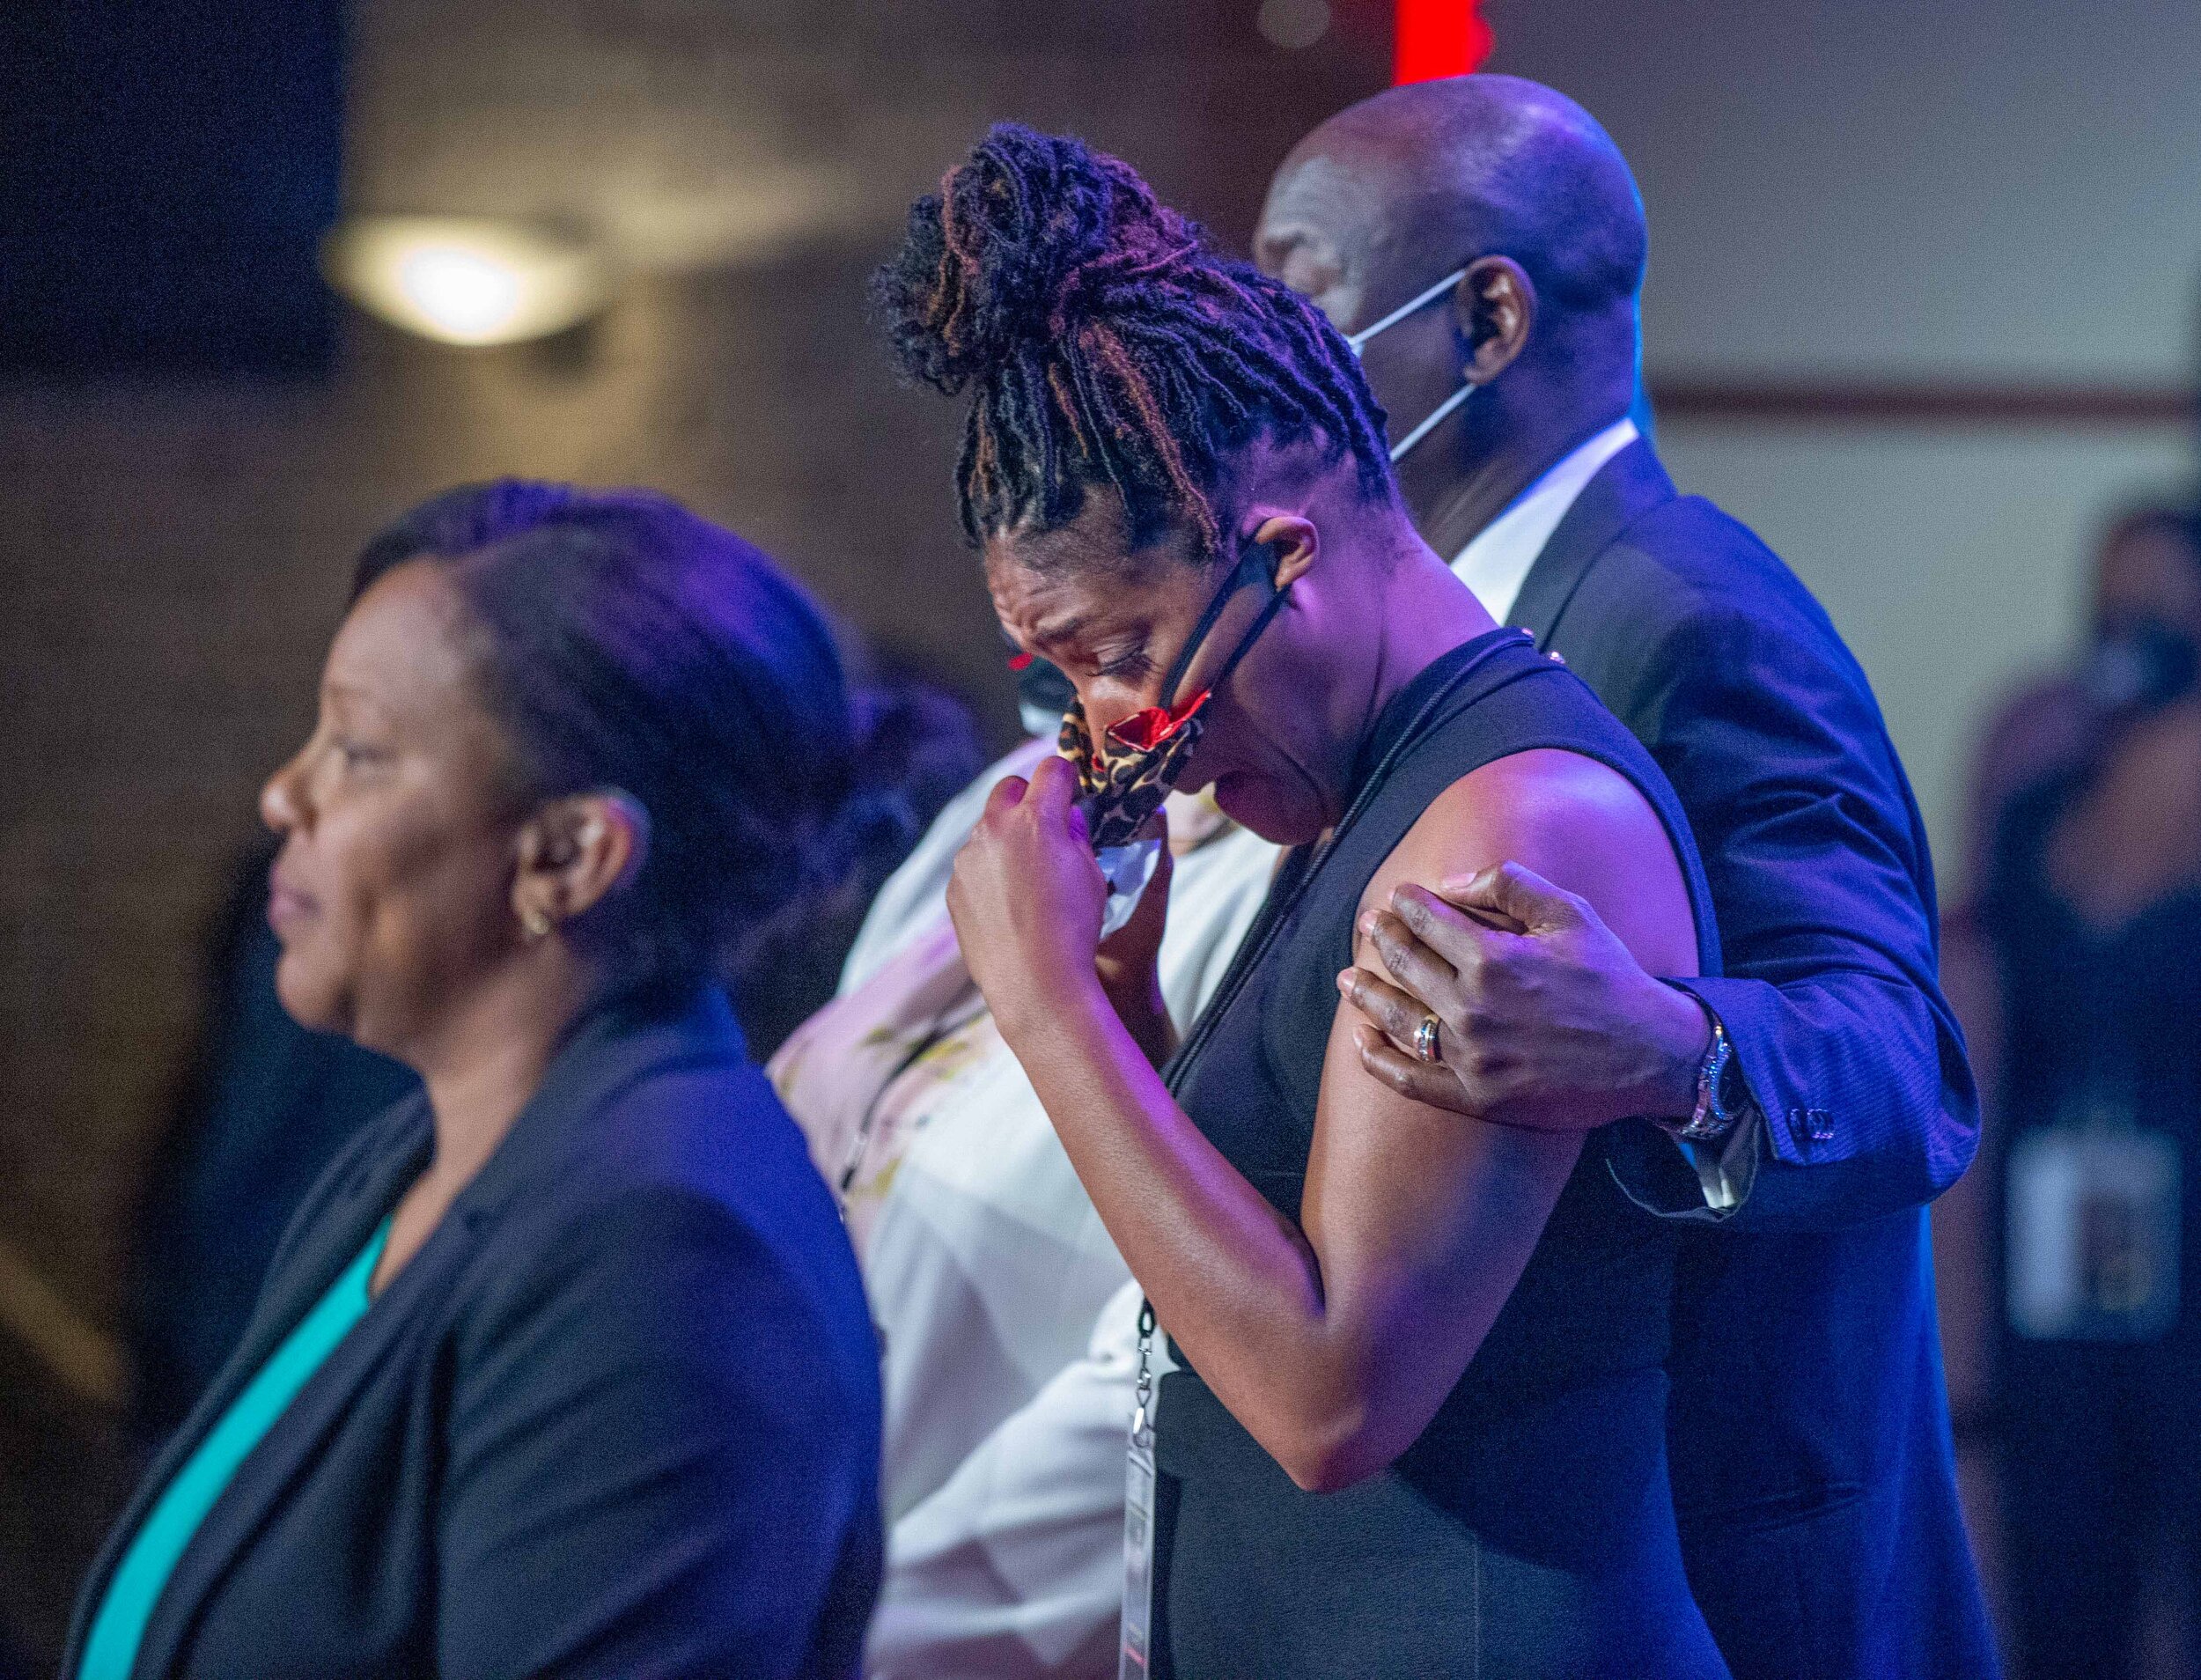  Audience members pause and bows their heads, some nreaking down in tears  for the amount of time former Officer Chauvin had his knee on Geroge Floyd's neck at the memorial for Geroge at North Central University in Minneapolis, Minnesota on Jun 4, 20